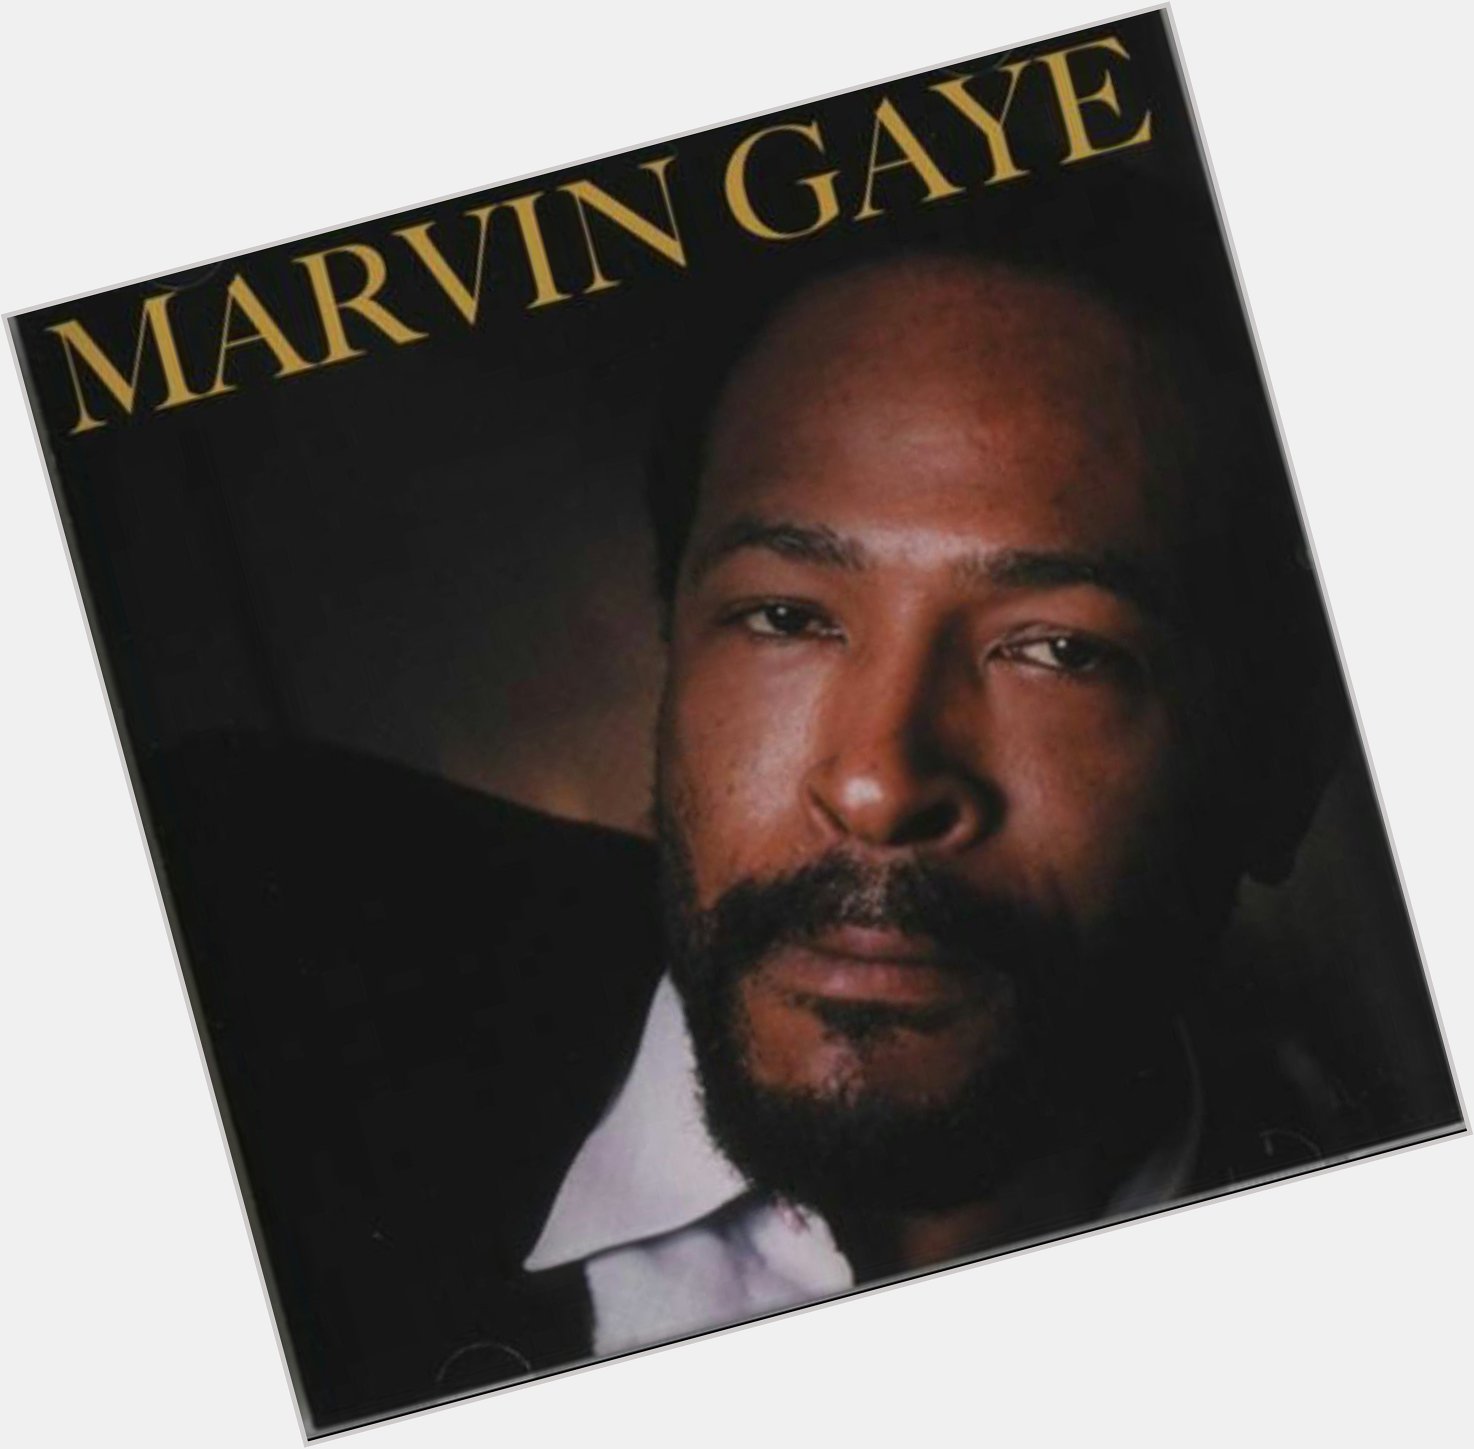 Happy birthday to you Marvin Gaye love you rip           